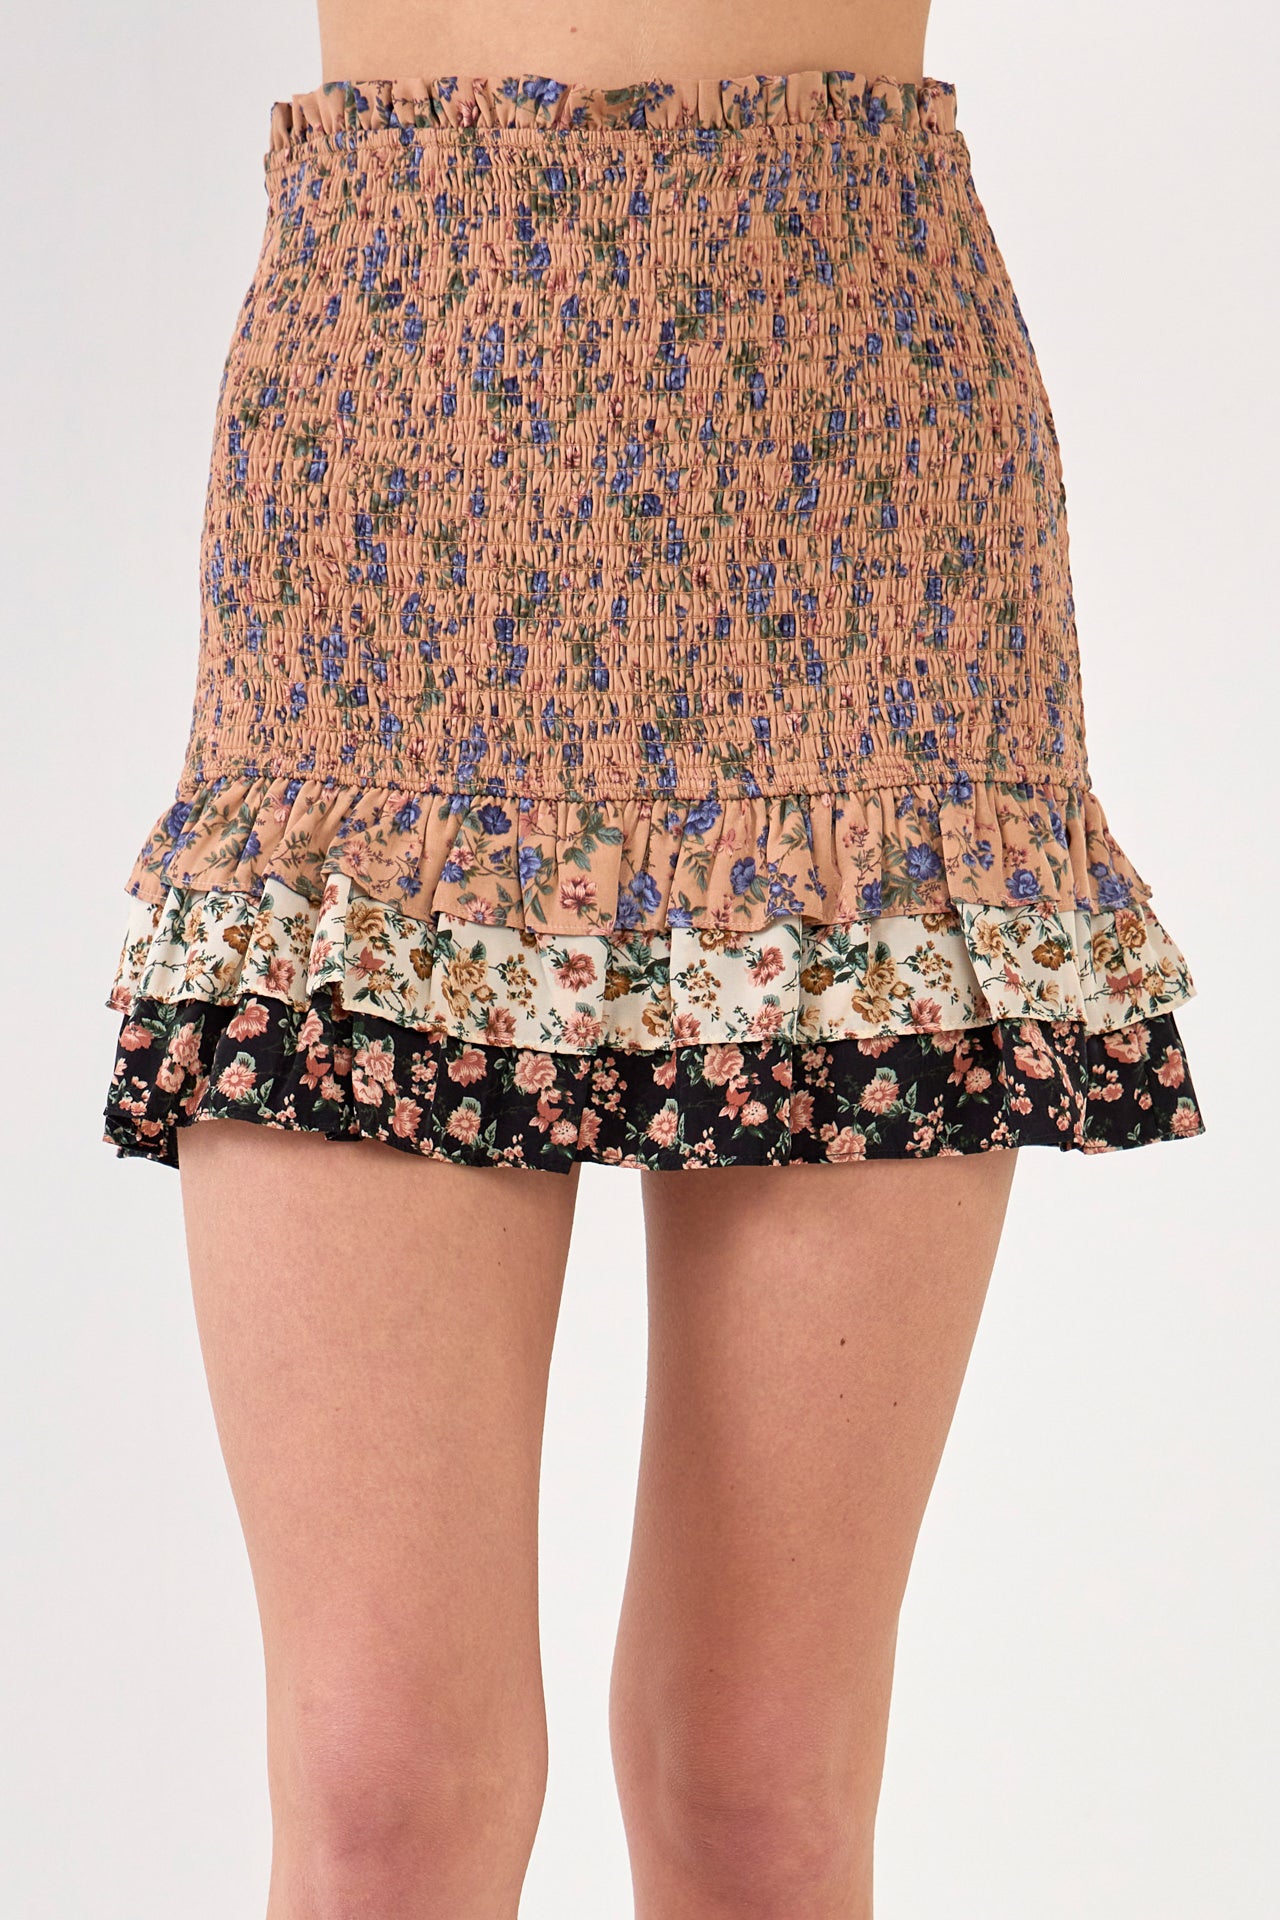 FREE THE ROSES - Floral Multi Color Mini Skirt - SKIRTS available at Objectrare